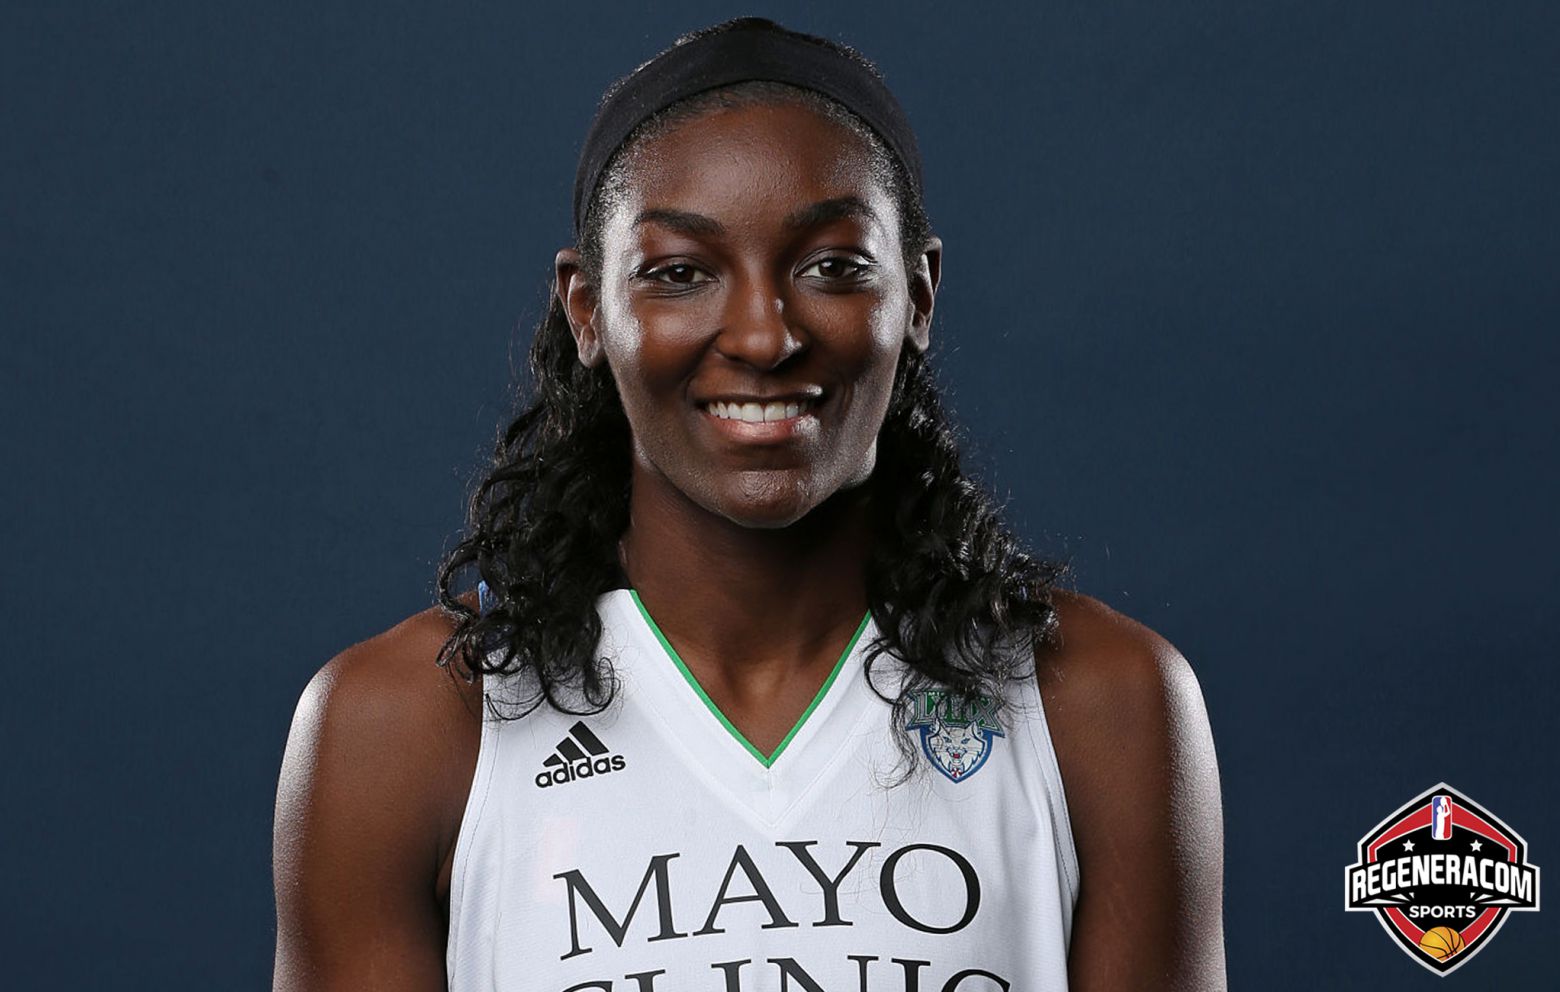 ASIA TAYLOR has signed in the WNBA with the New York Liberty